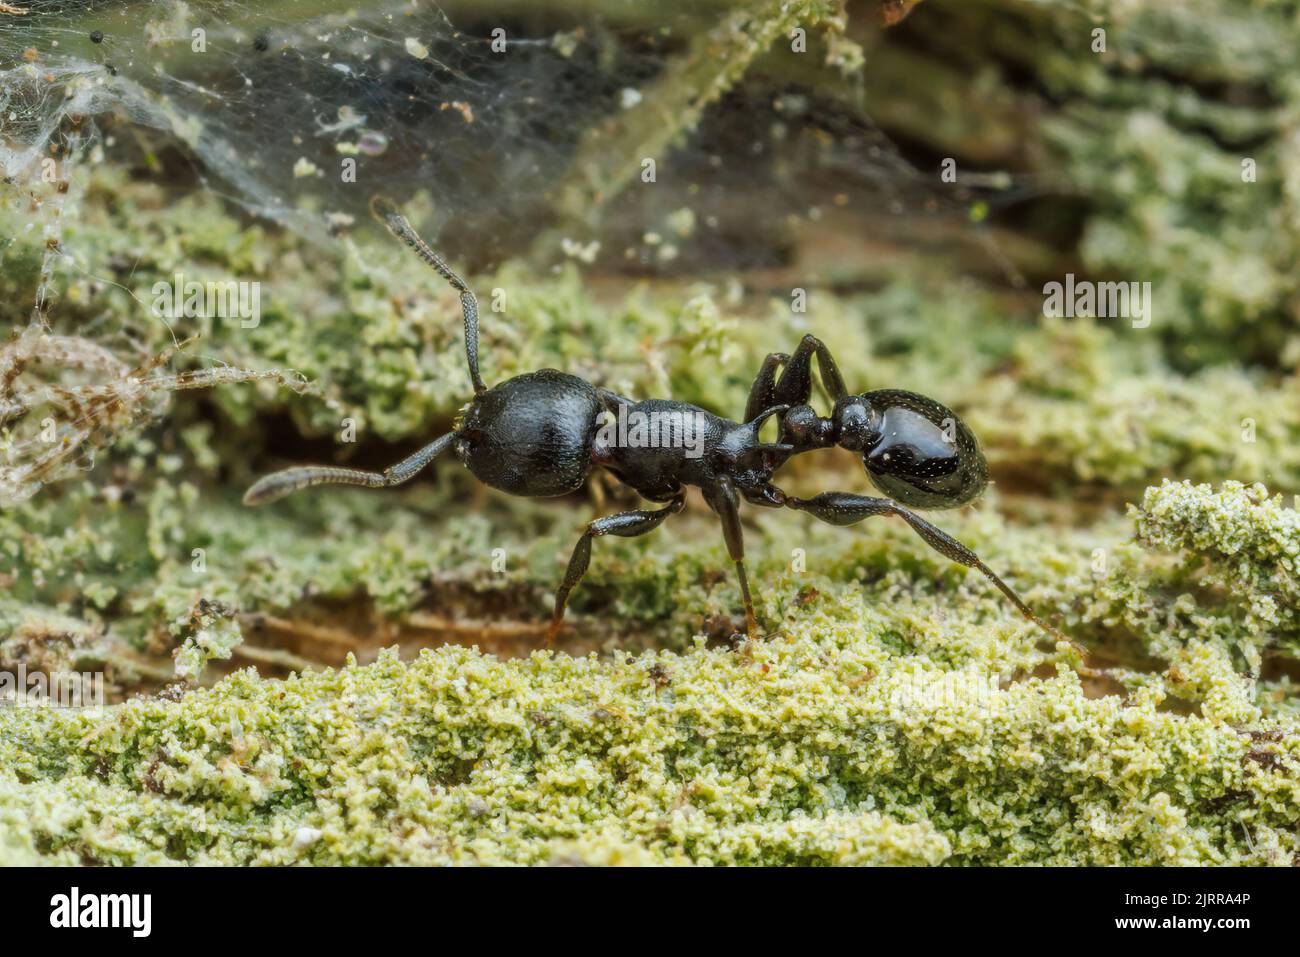 An Acorn Ant (Temnothorax misomoschus) forages on the side of a sabal palm (Sabal mexicana) tree. Stock Photo